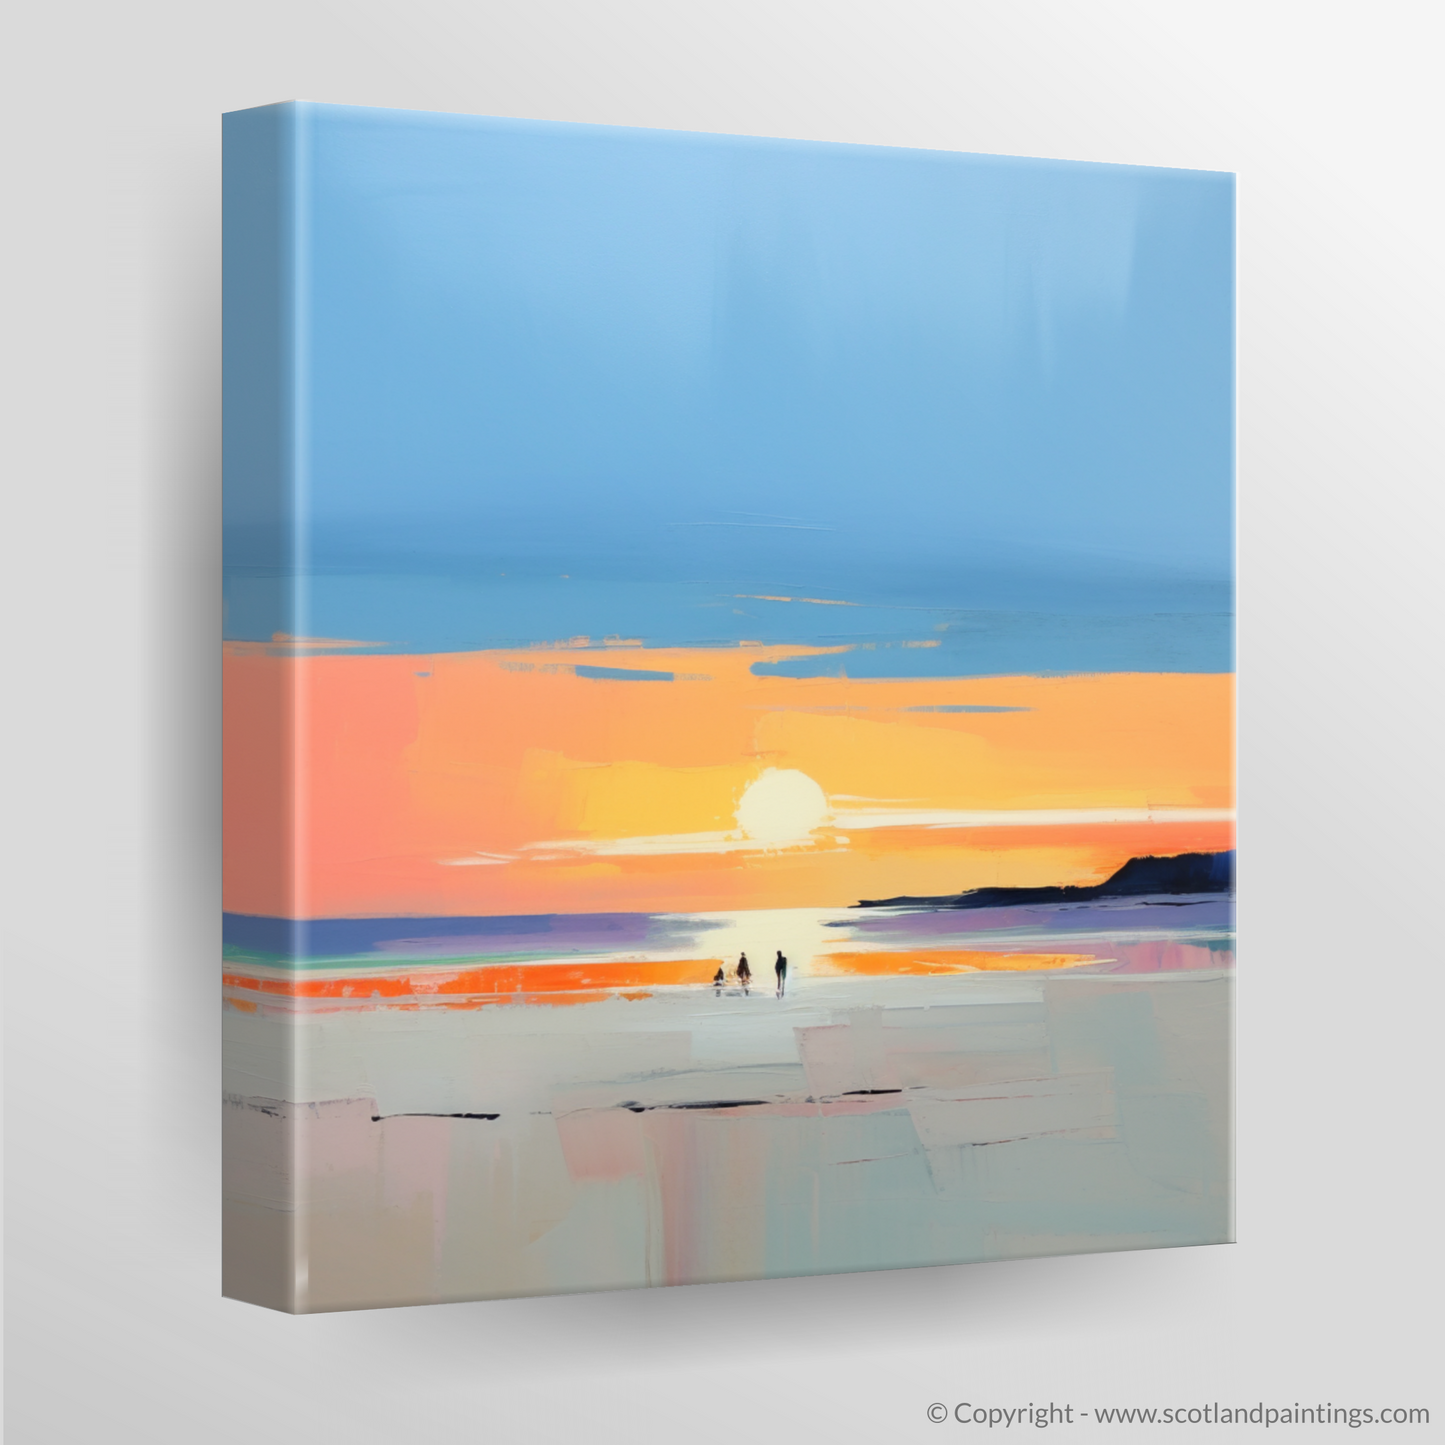 Longniddry Beach at Sunset: A Contemporary Ode to Scottish Shores